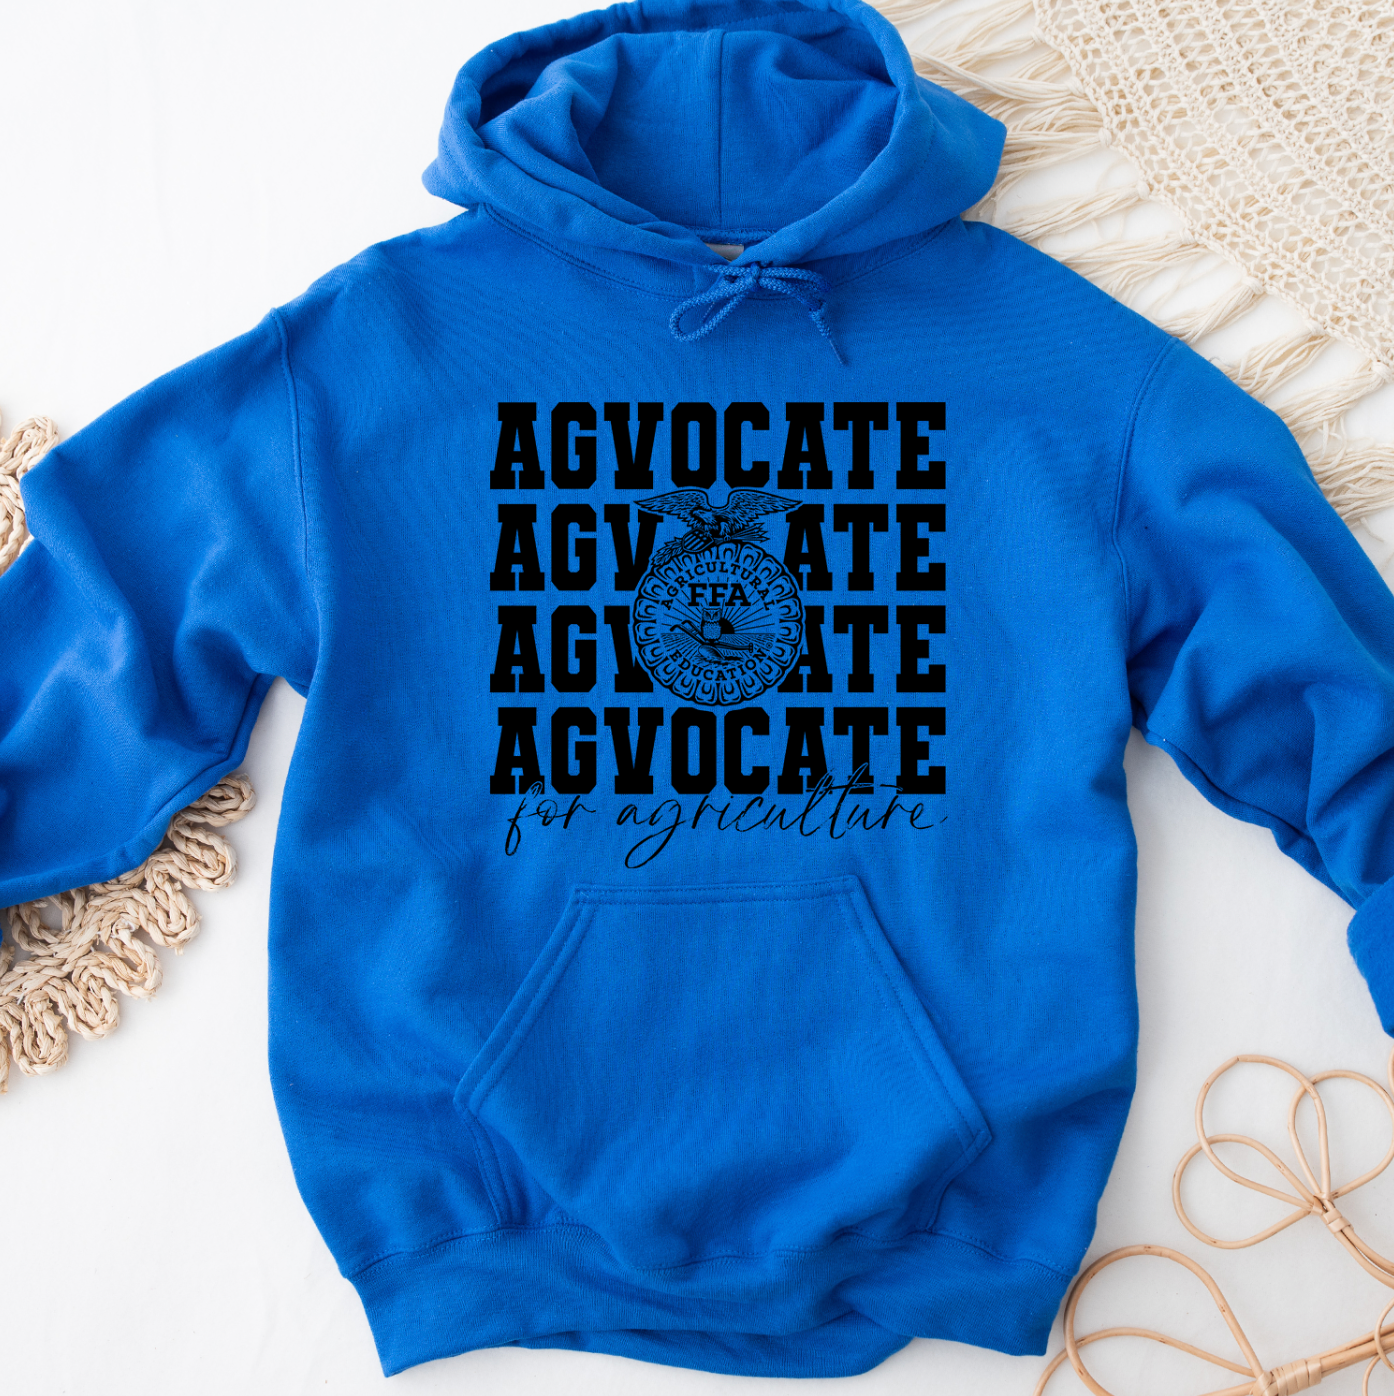 Black Emblem Agvocate For Agriculture Hoodie (S-3XL) Unisex - Multiple Colors!